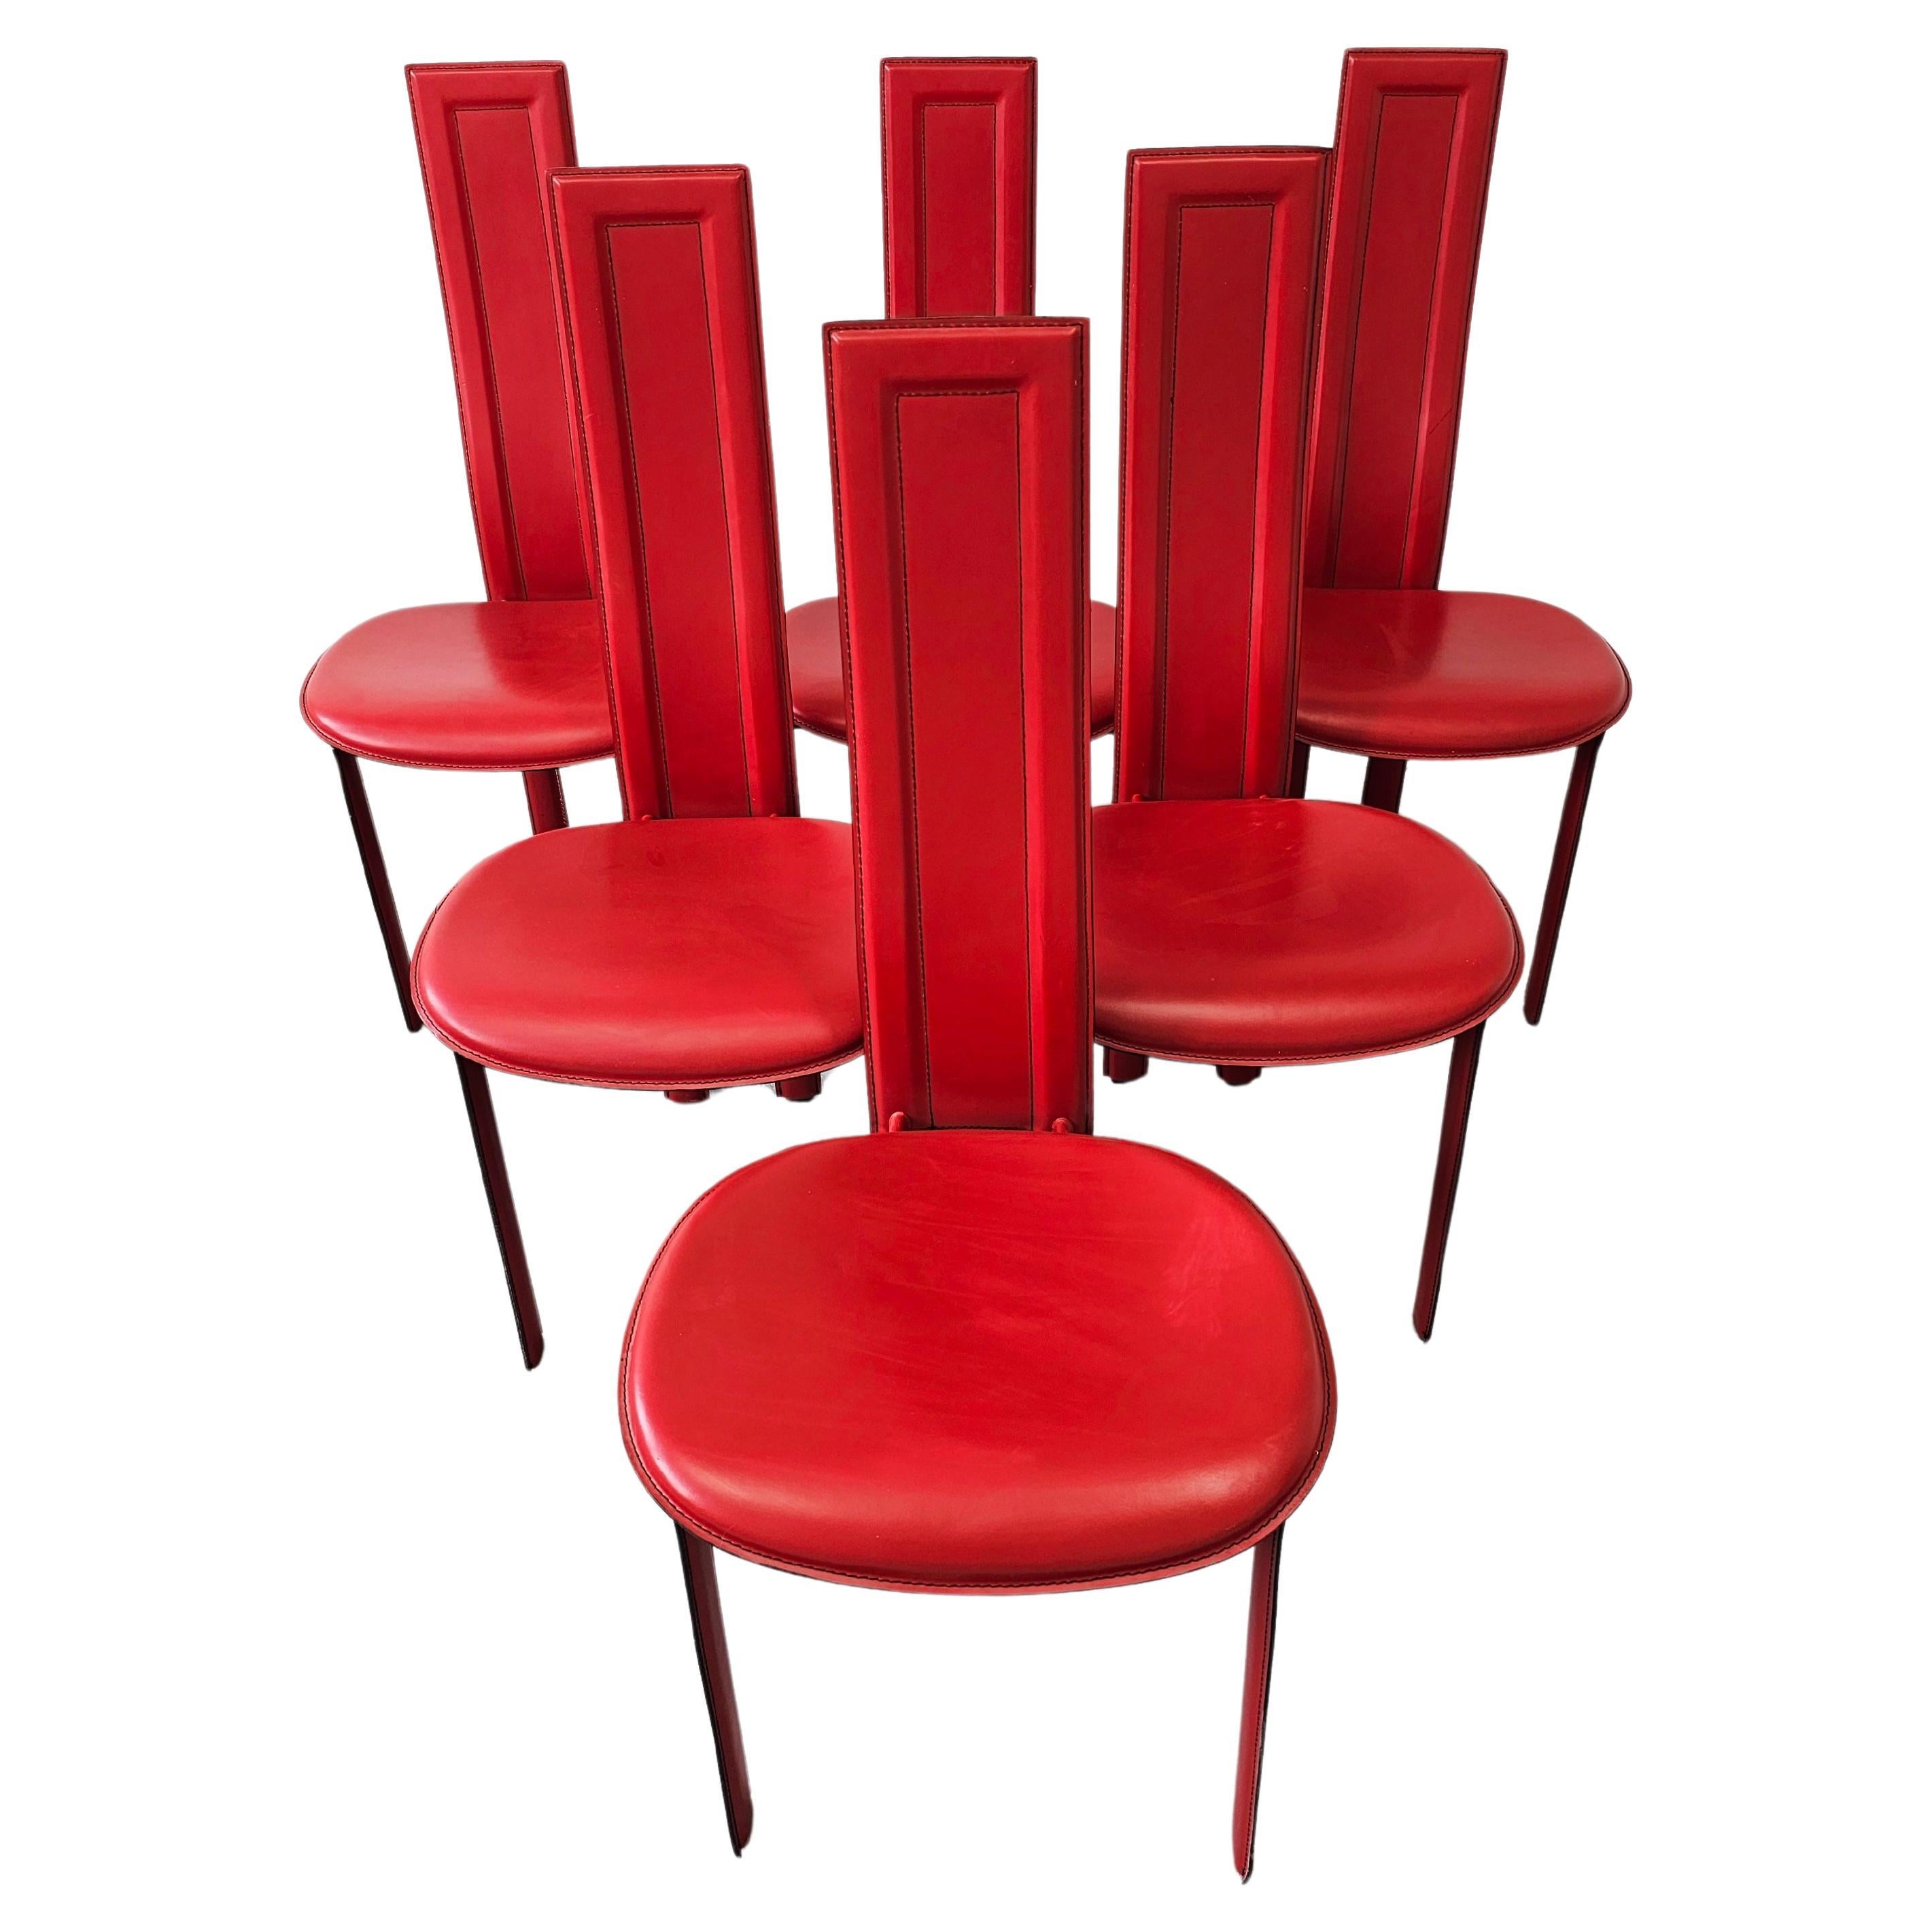 Set of 6 "Alice" Dining Chairs by Giorgio Cattelan in red leather, Italy 1980s